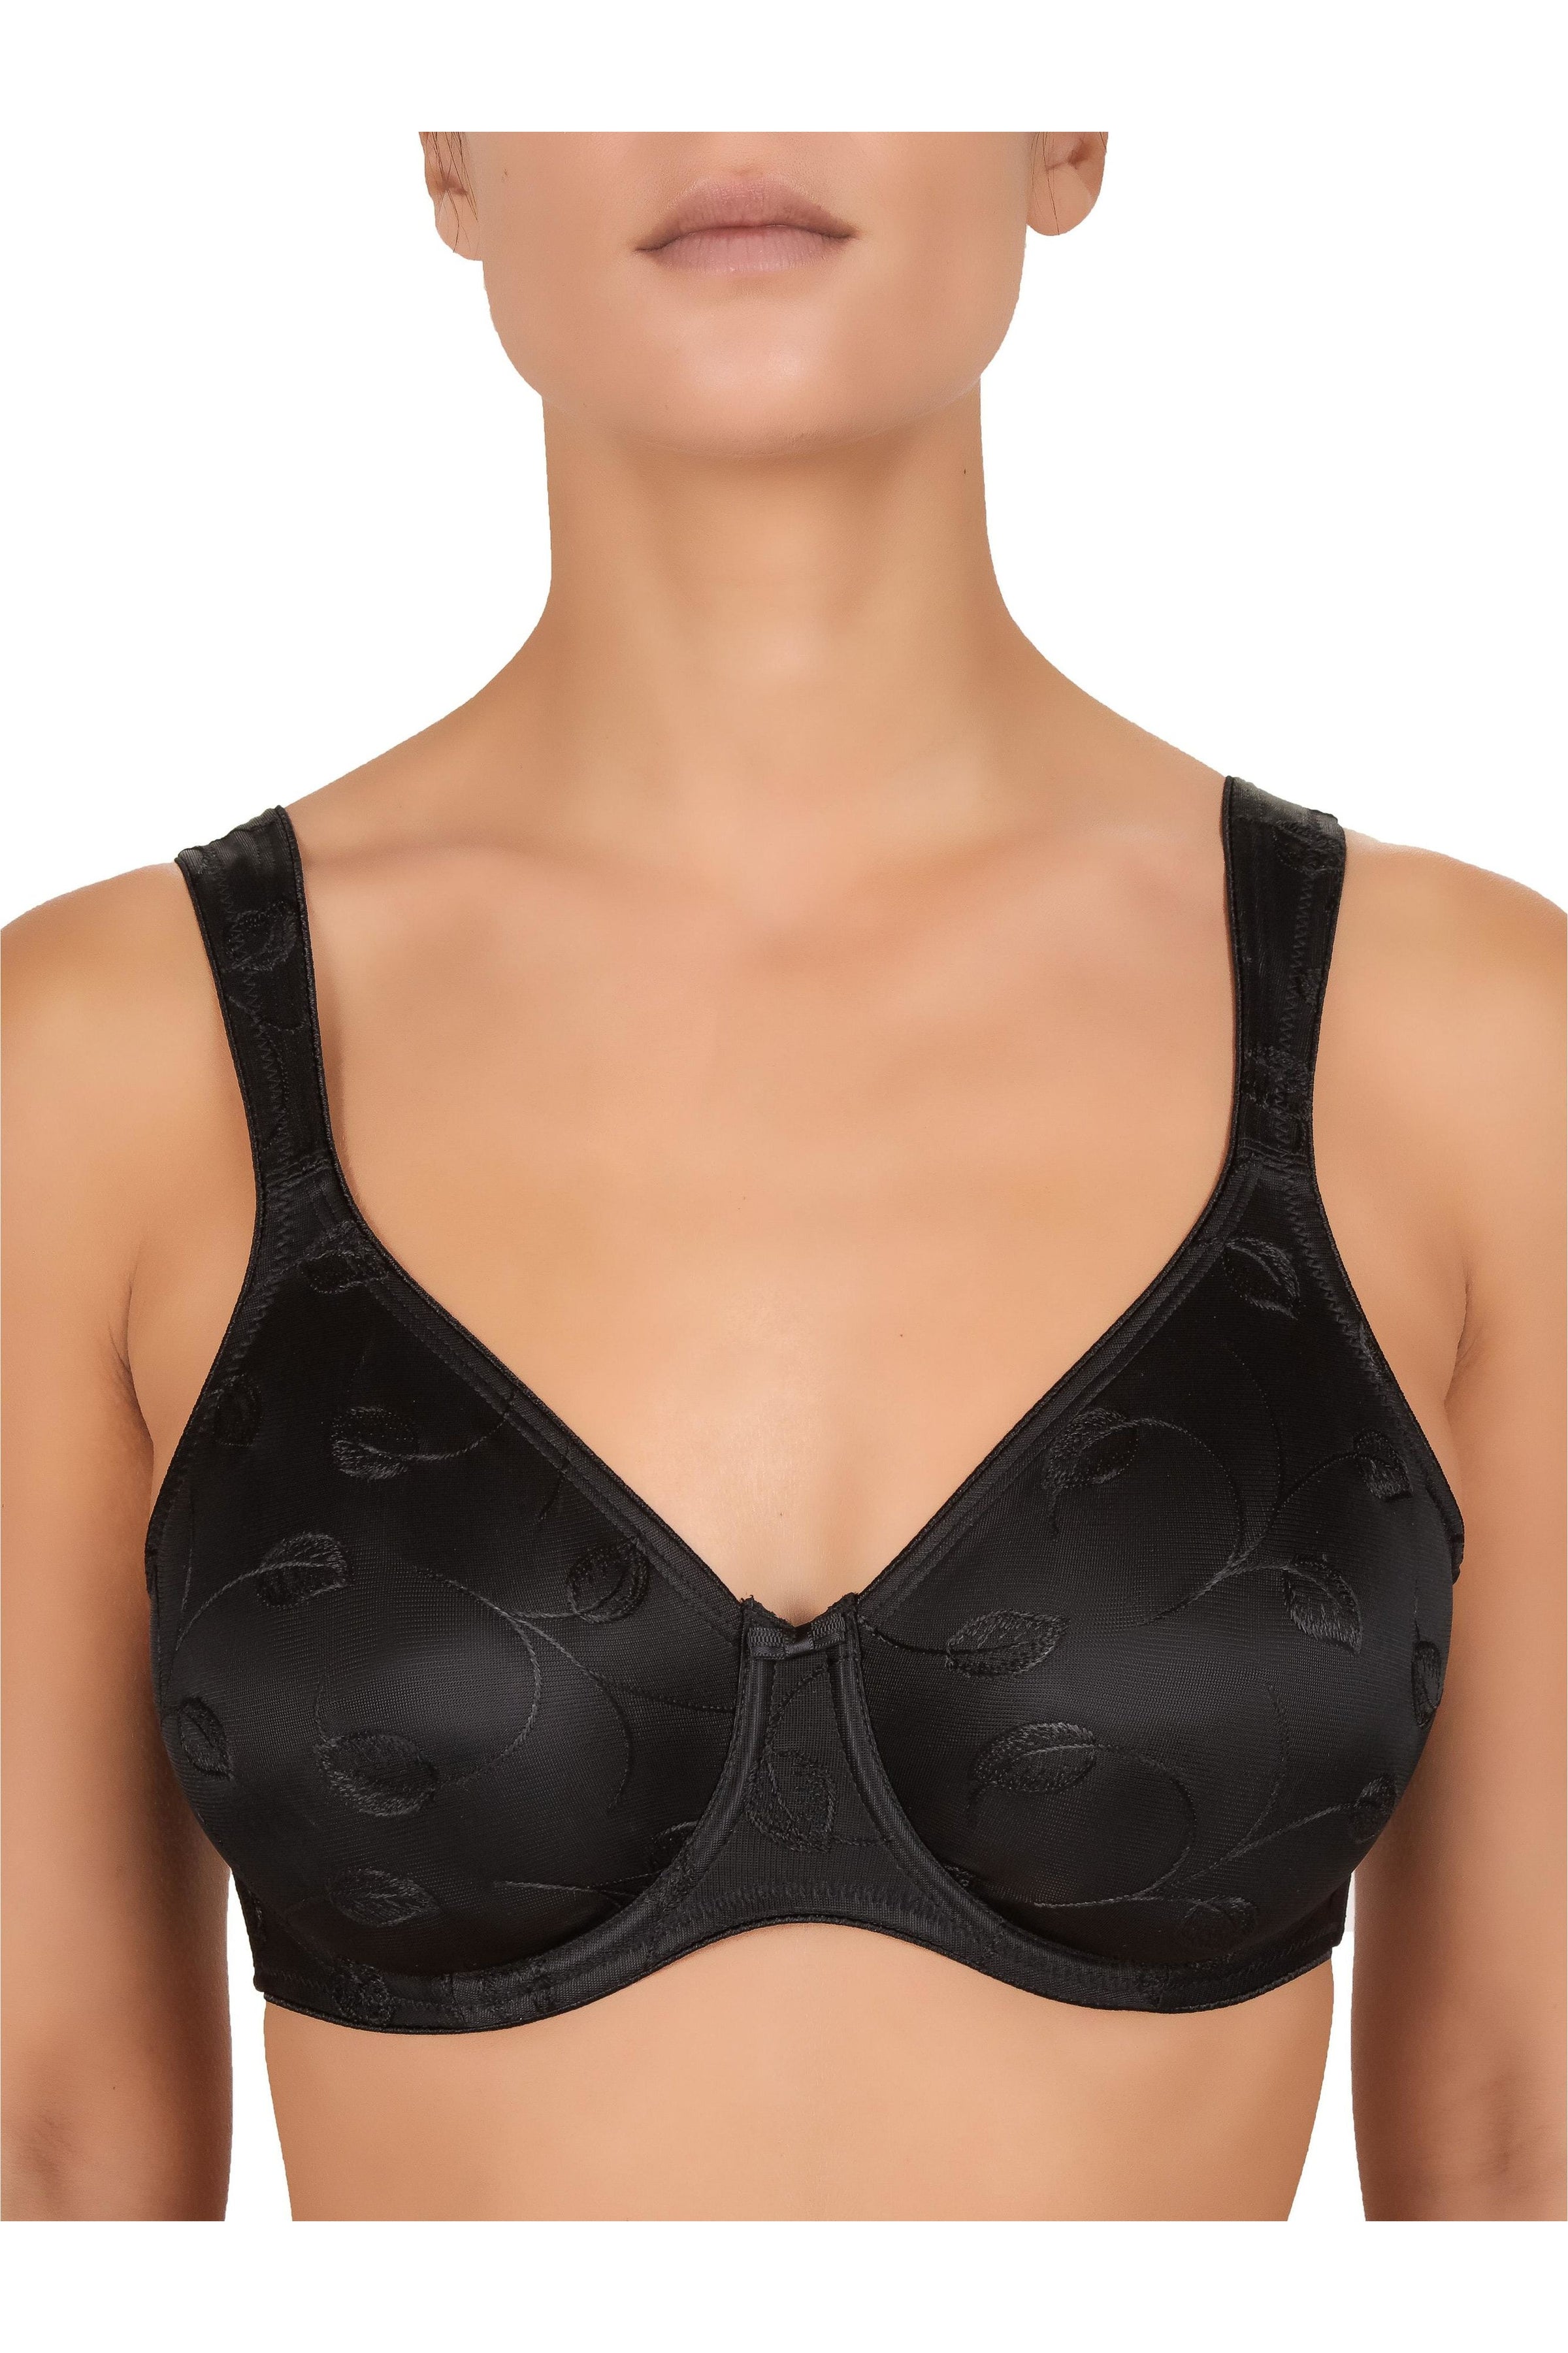 Felina 110789 Marielle Lace Full Busted Underwire Bra 40D